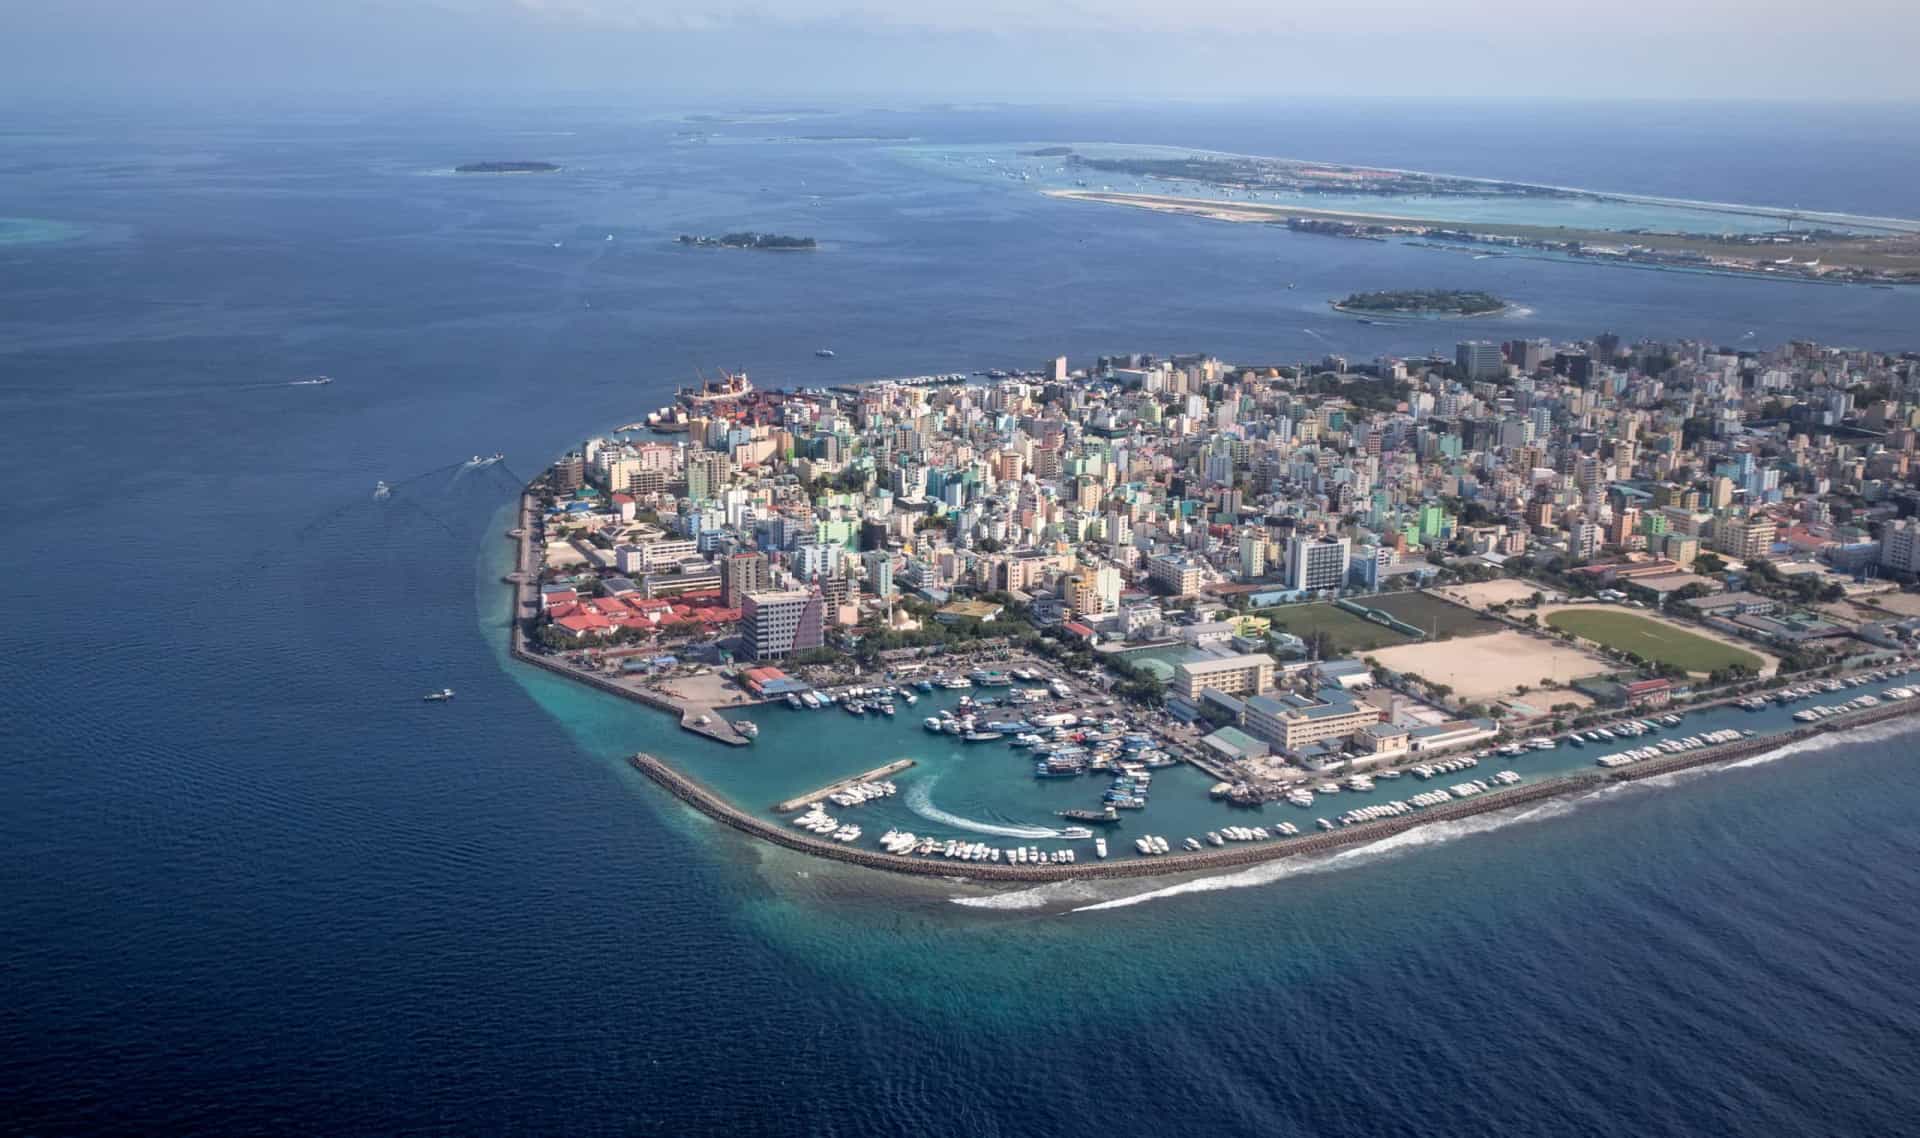 <p>The capital city is a sight to behold not in terms of beauty, but because of the ingeniousness with which they have constructed a city on a sand island. When you fly into the Maldives, you will almost certainly land here. It's worth taking a peek around.</p>